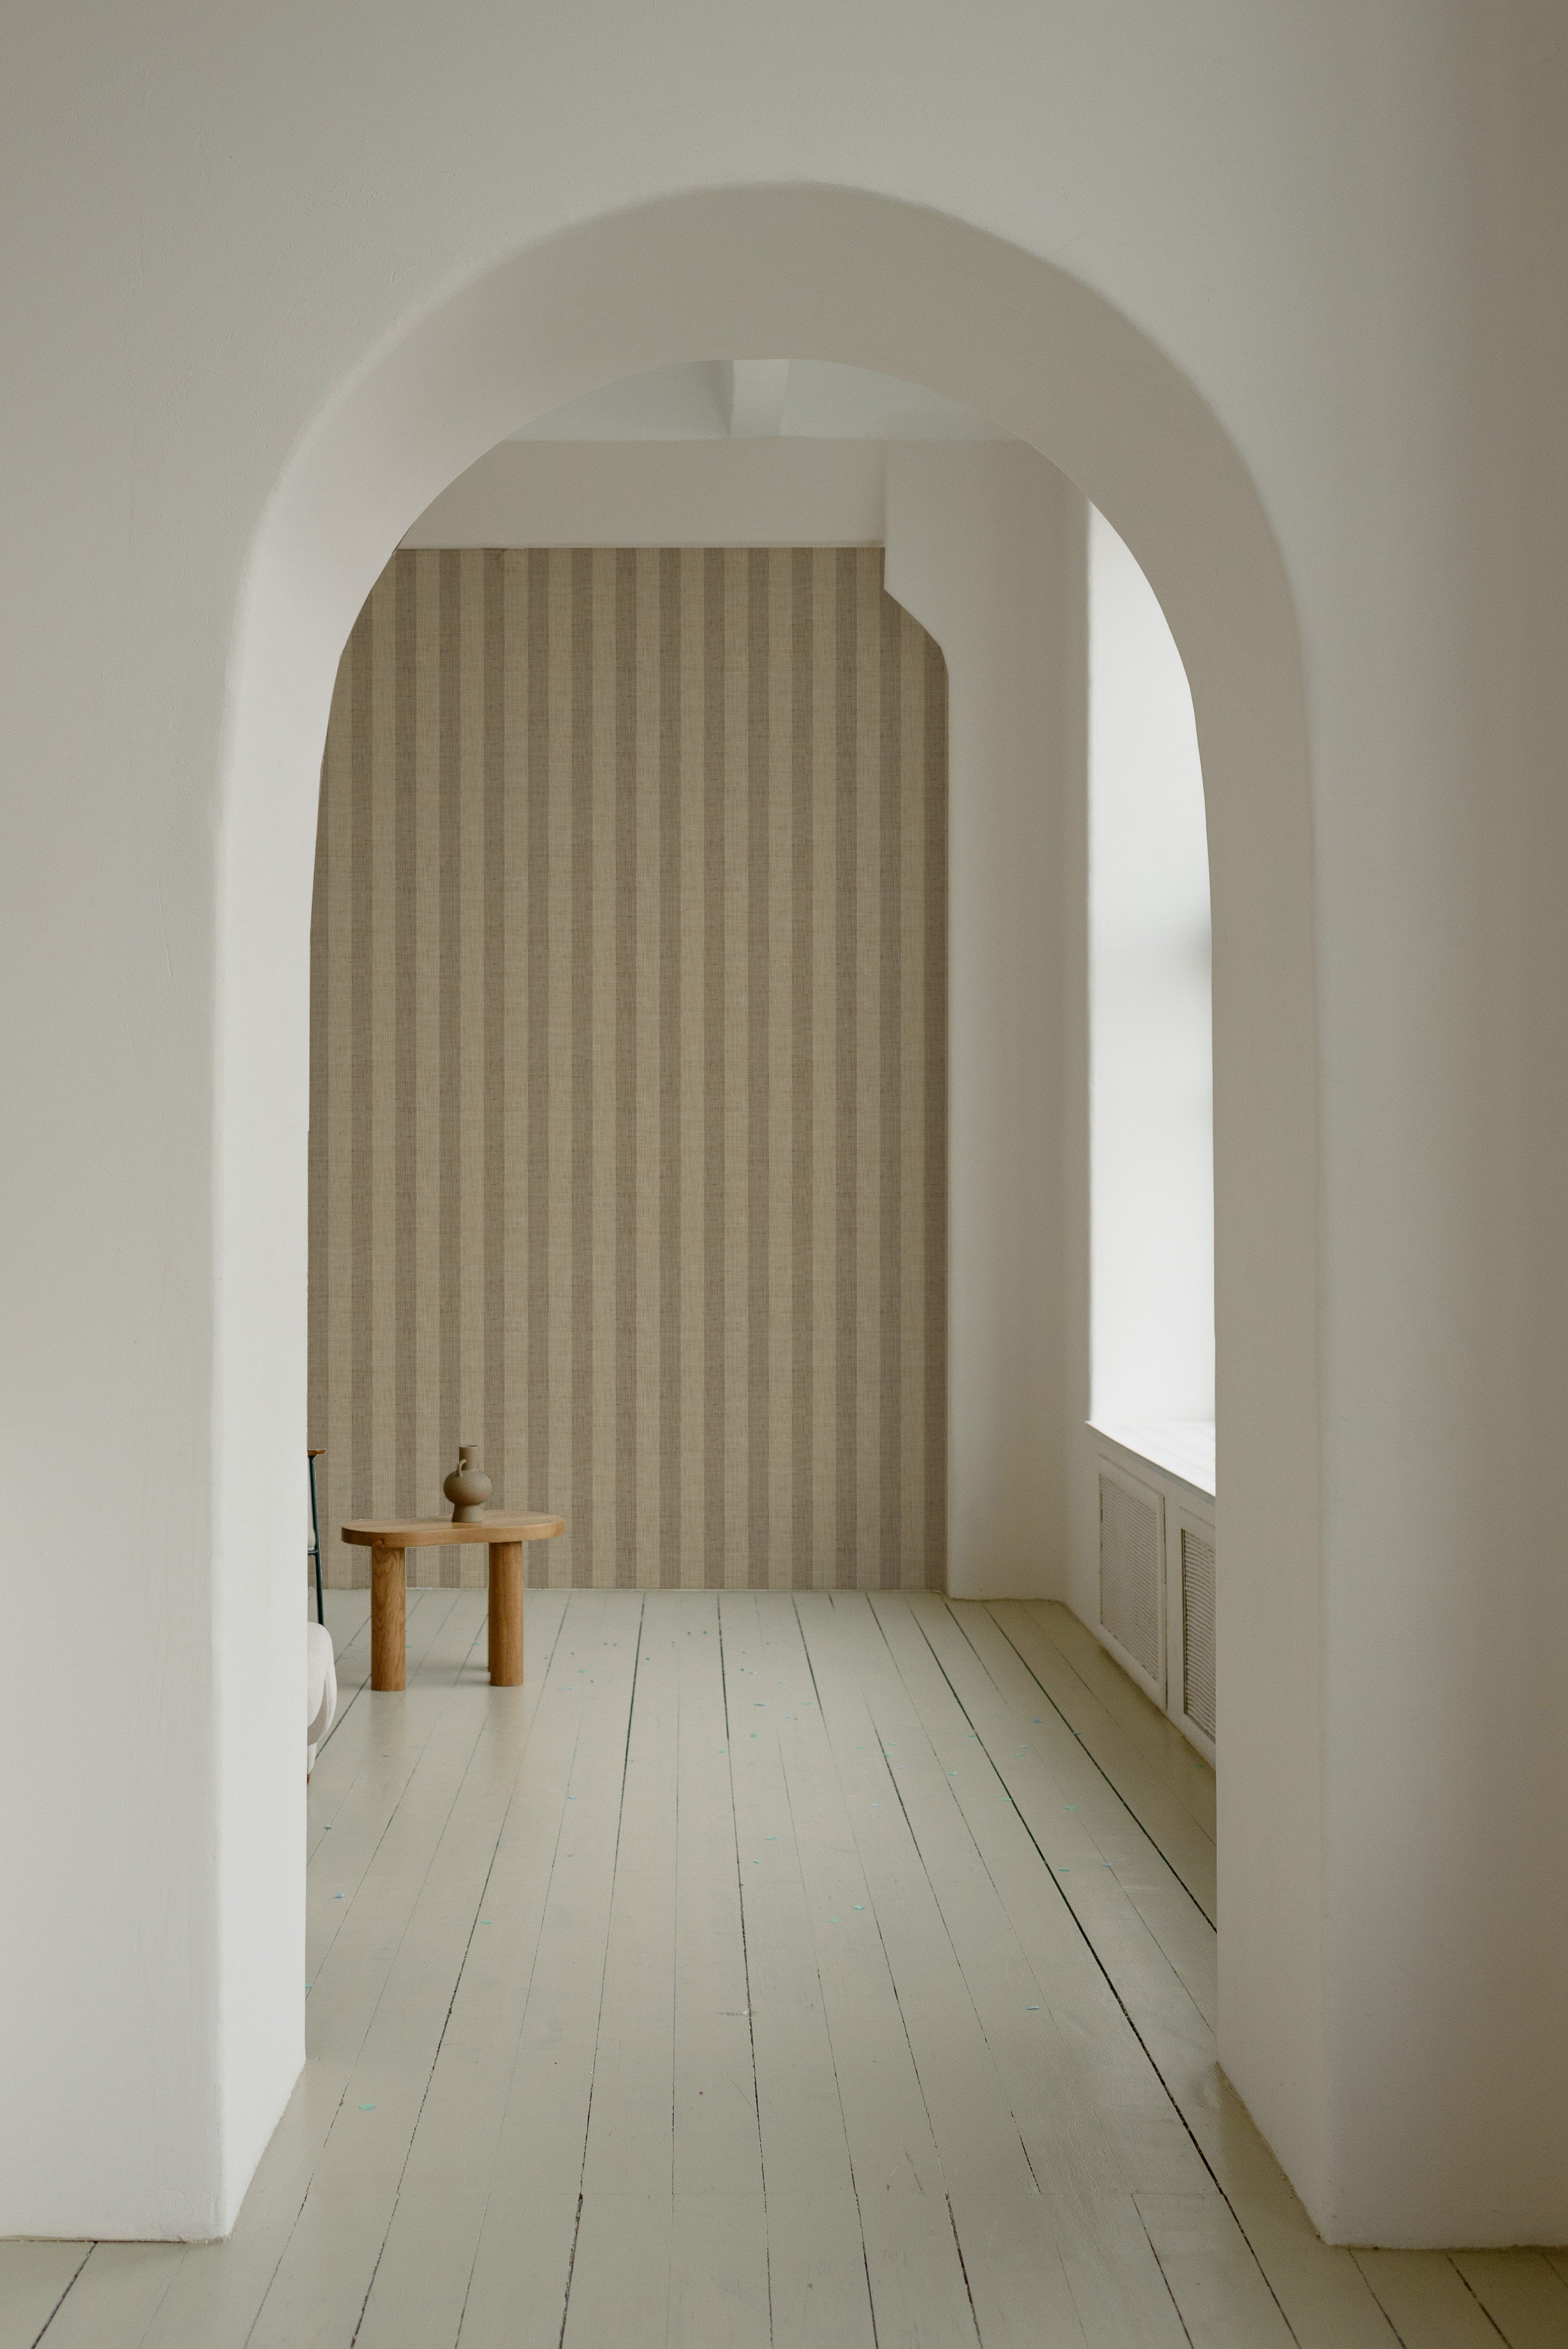 A minimalist archway leads to a room adorned with Classic Striped Wallpaper in neutral beige, enhancing the serene and elegant ambiance. A simple wooden stool and a small ceramic vase sit by the white painted floor, emphasizing the wallpaper's understated elegance.